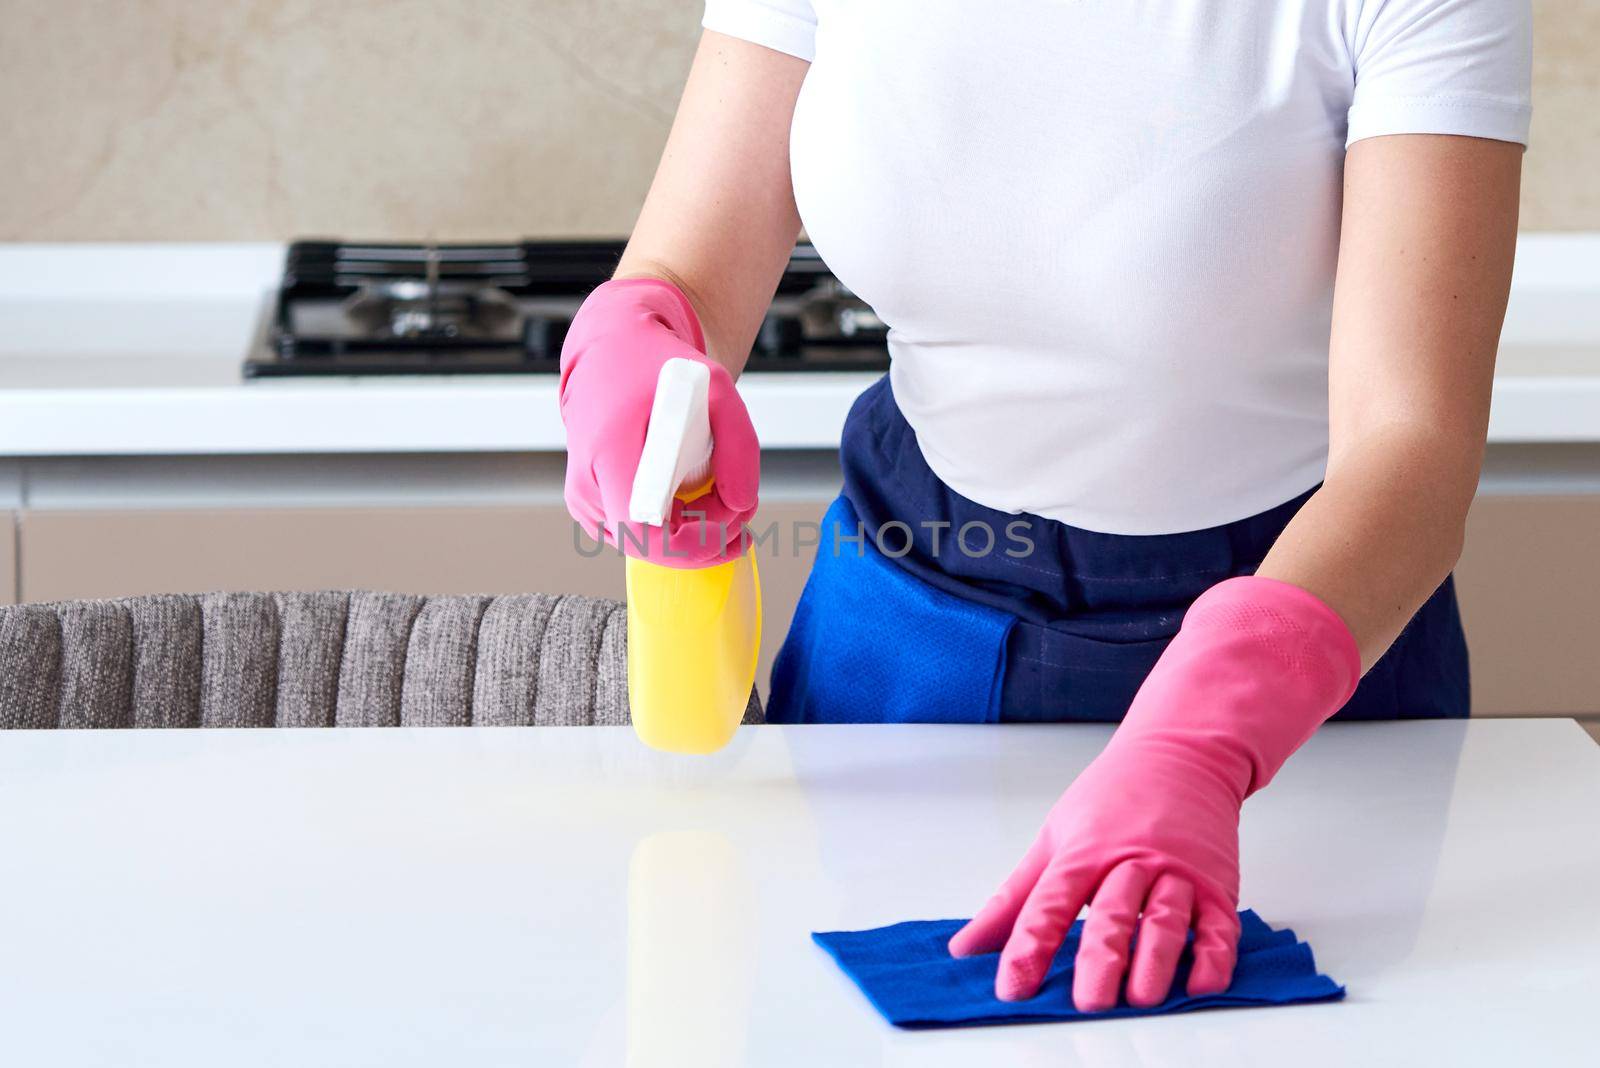 Woman cleaning home table sanitizing kitchen table surface with disinfectant spray bottle  by Mariakray